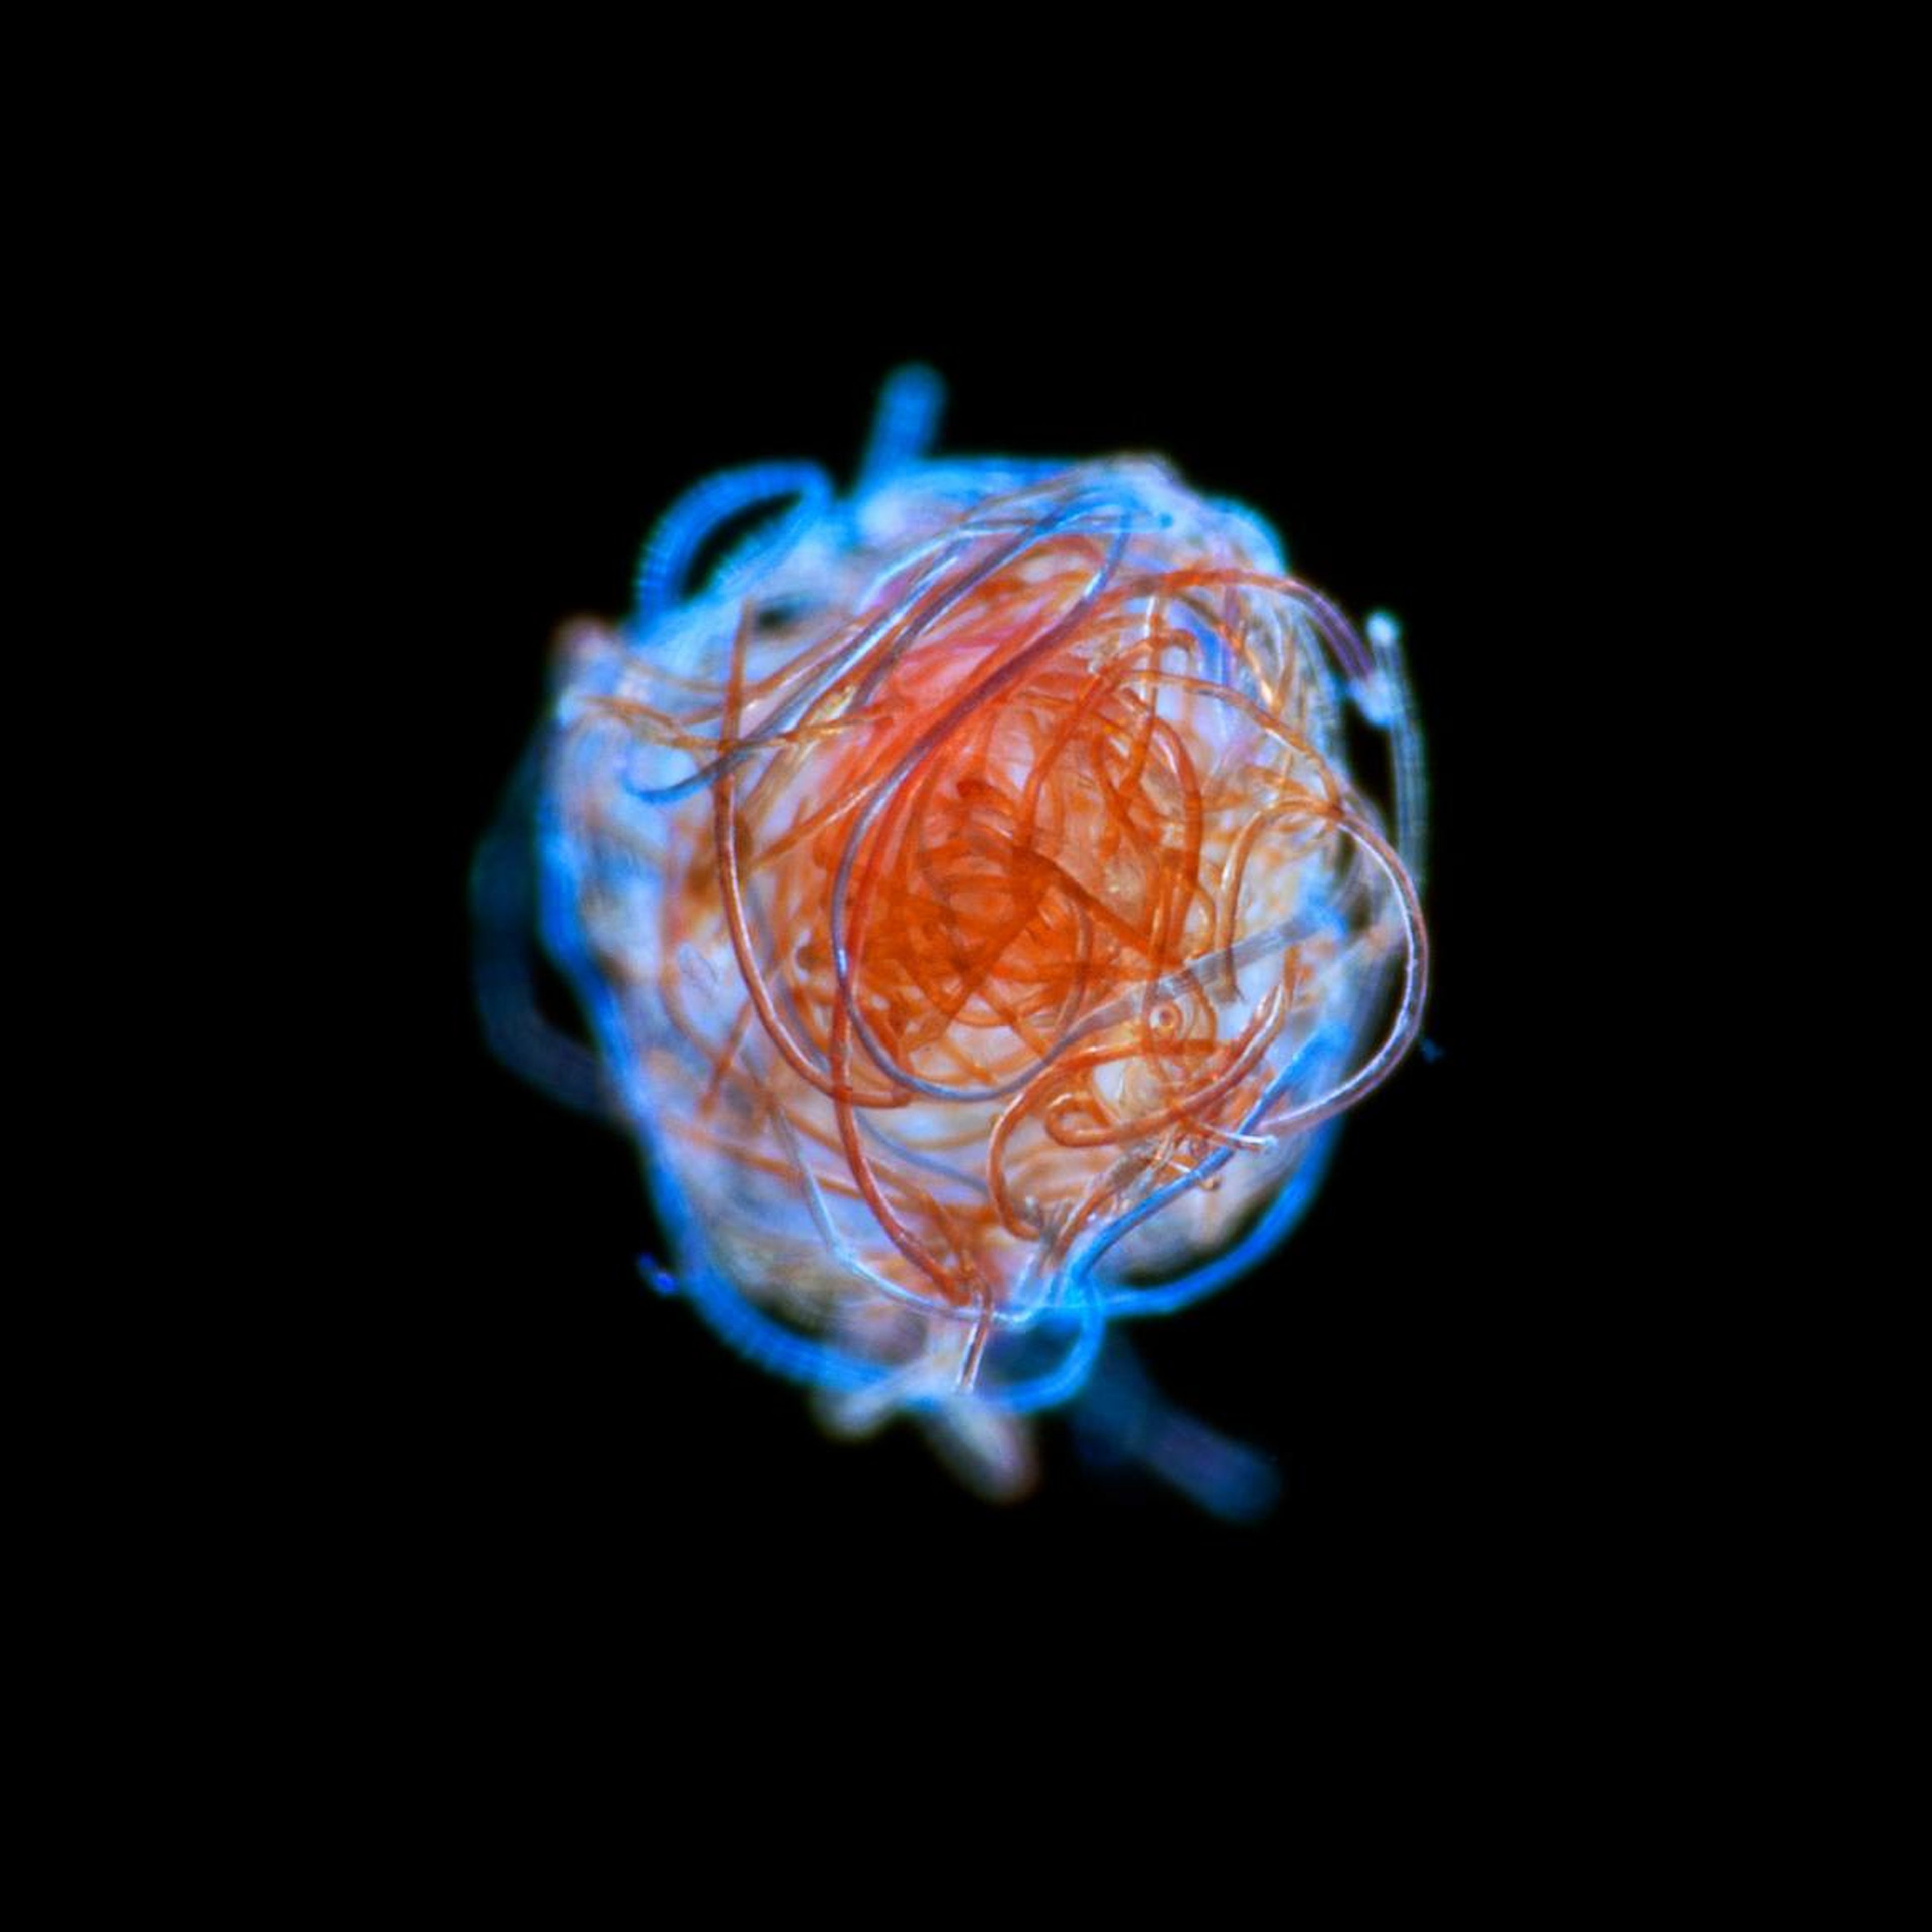 A ball of plastic microfibers found drifting in the ocean's plankton.